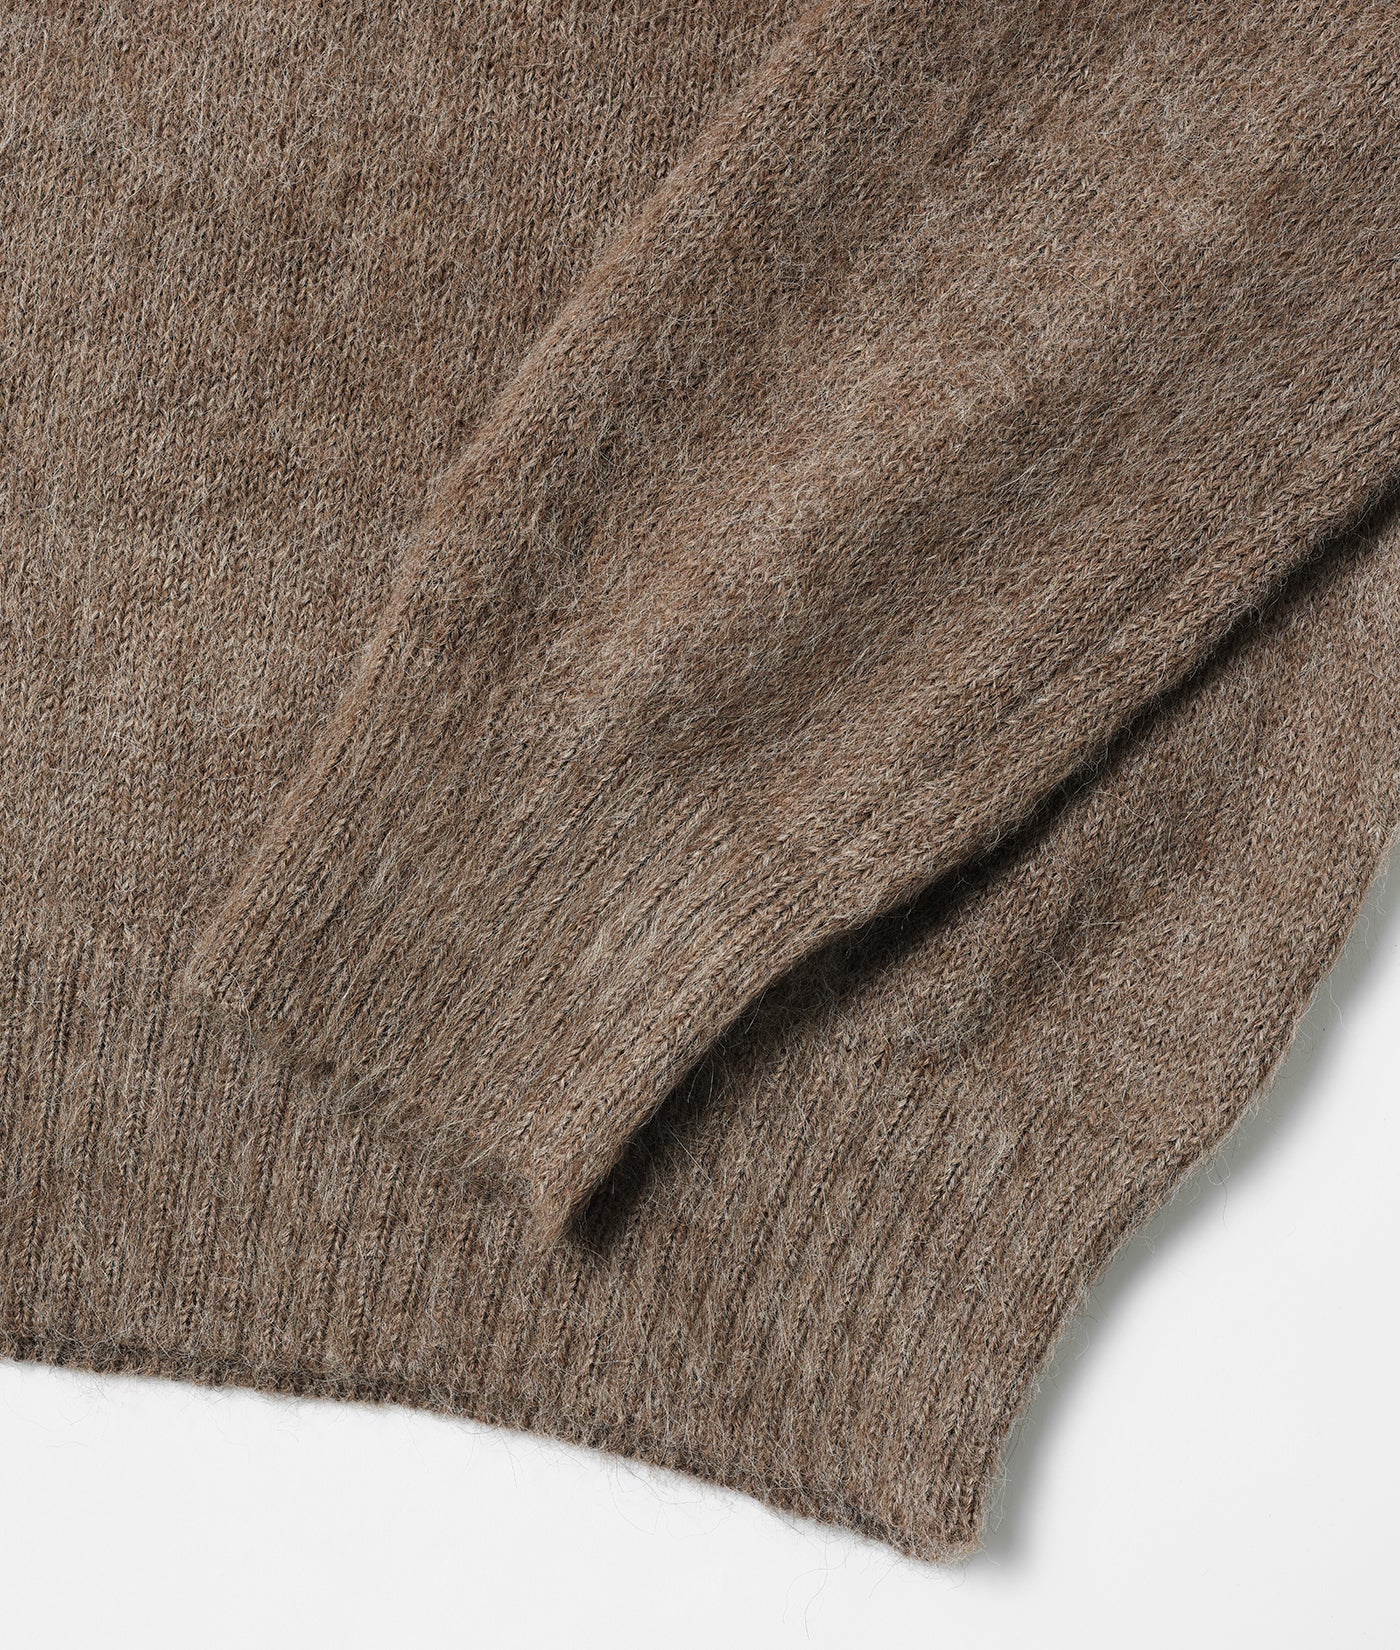 Alpaca Wool Crewneck Sweater | Industry of All Nations